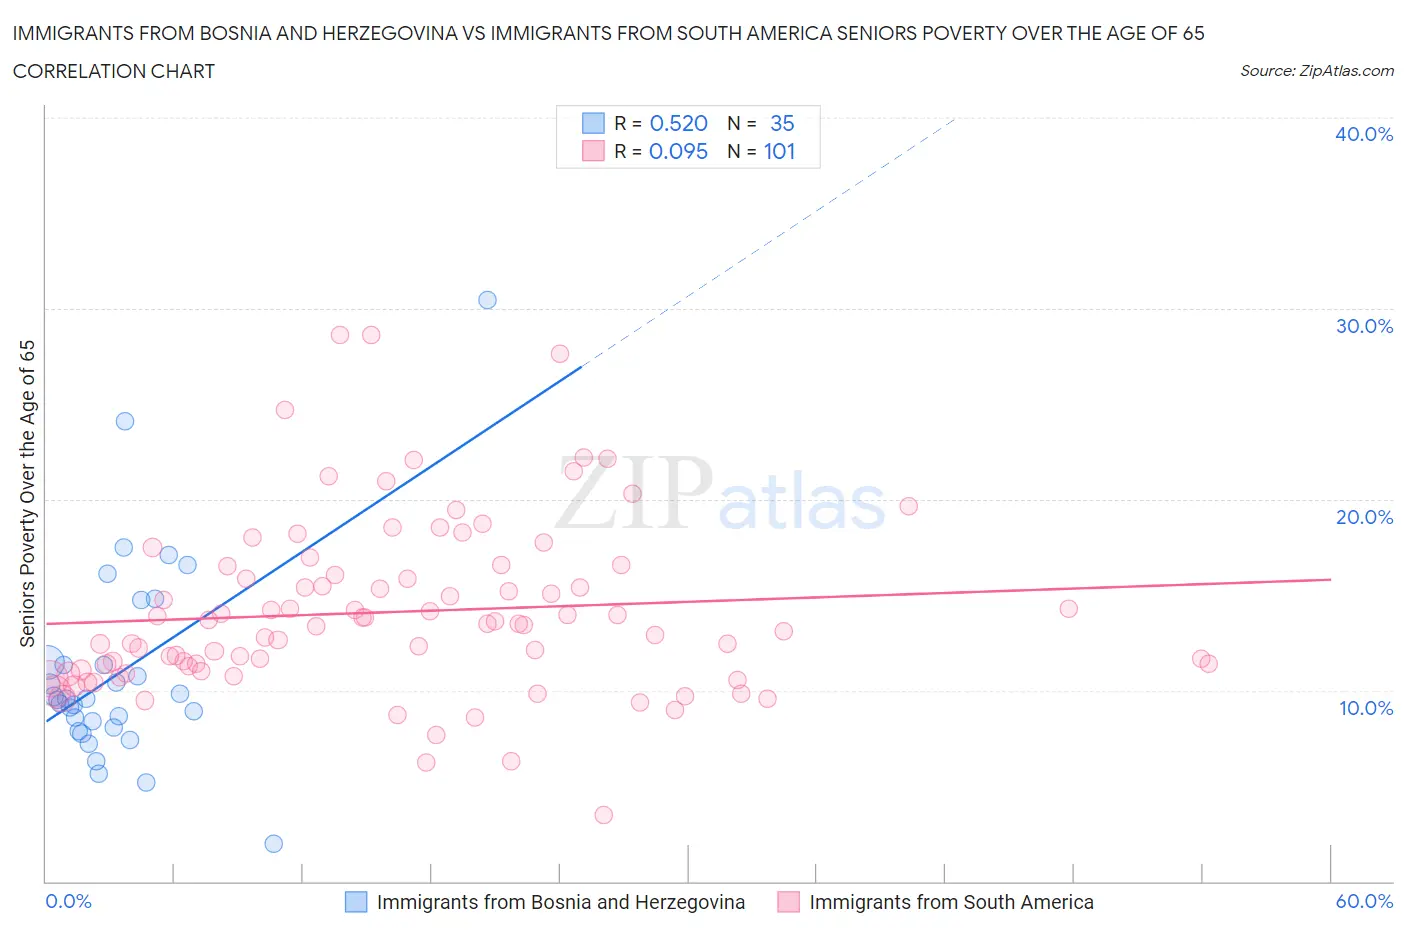 Immigrants from Bosnia and Herzegovina vs Immigrants from South America Seniors Poverty Over the Age of 65